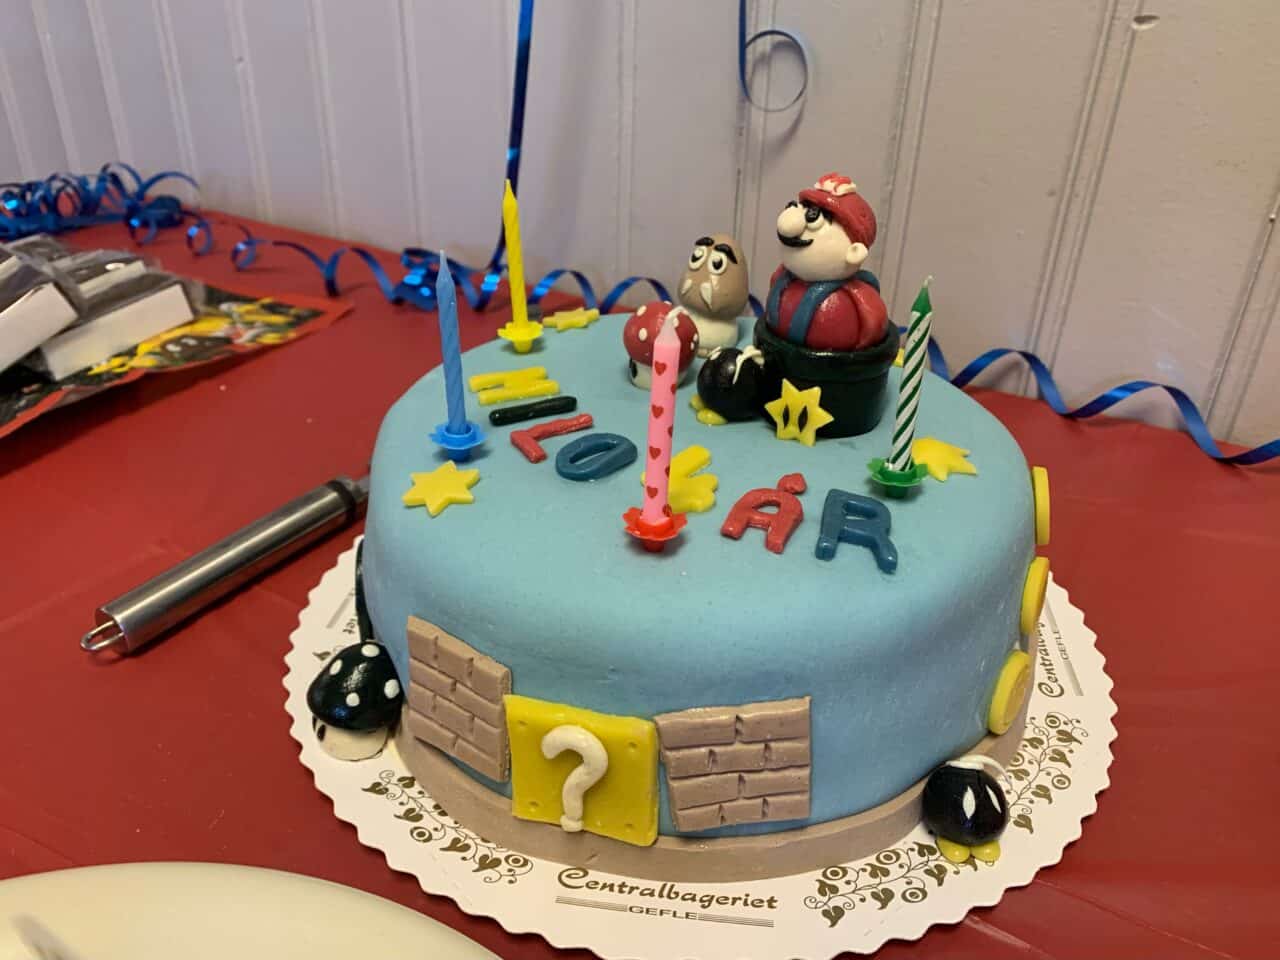 Super Mario Birthday Cake With Characters And Candles